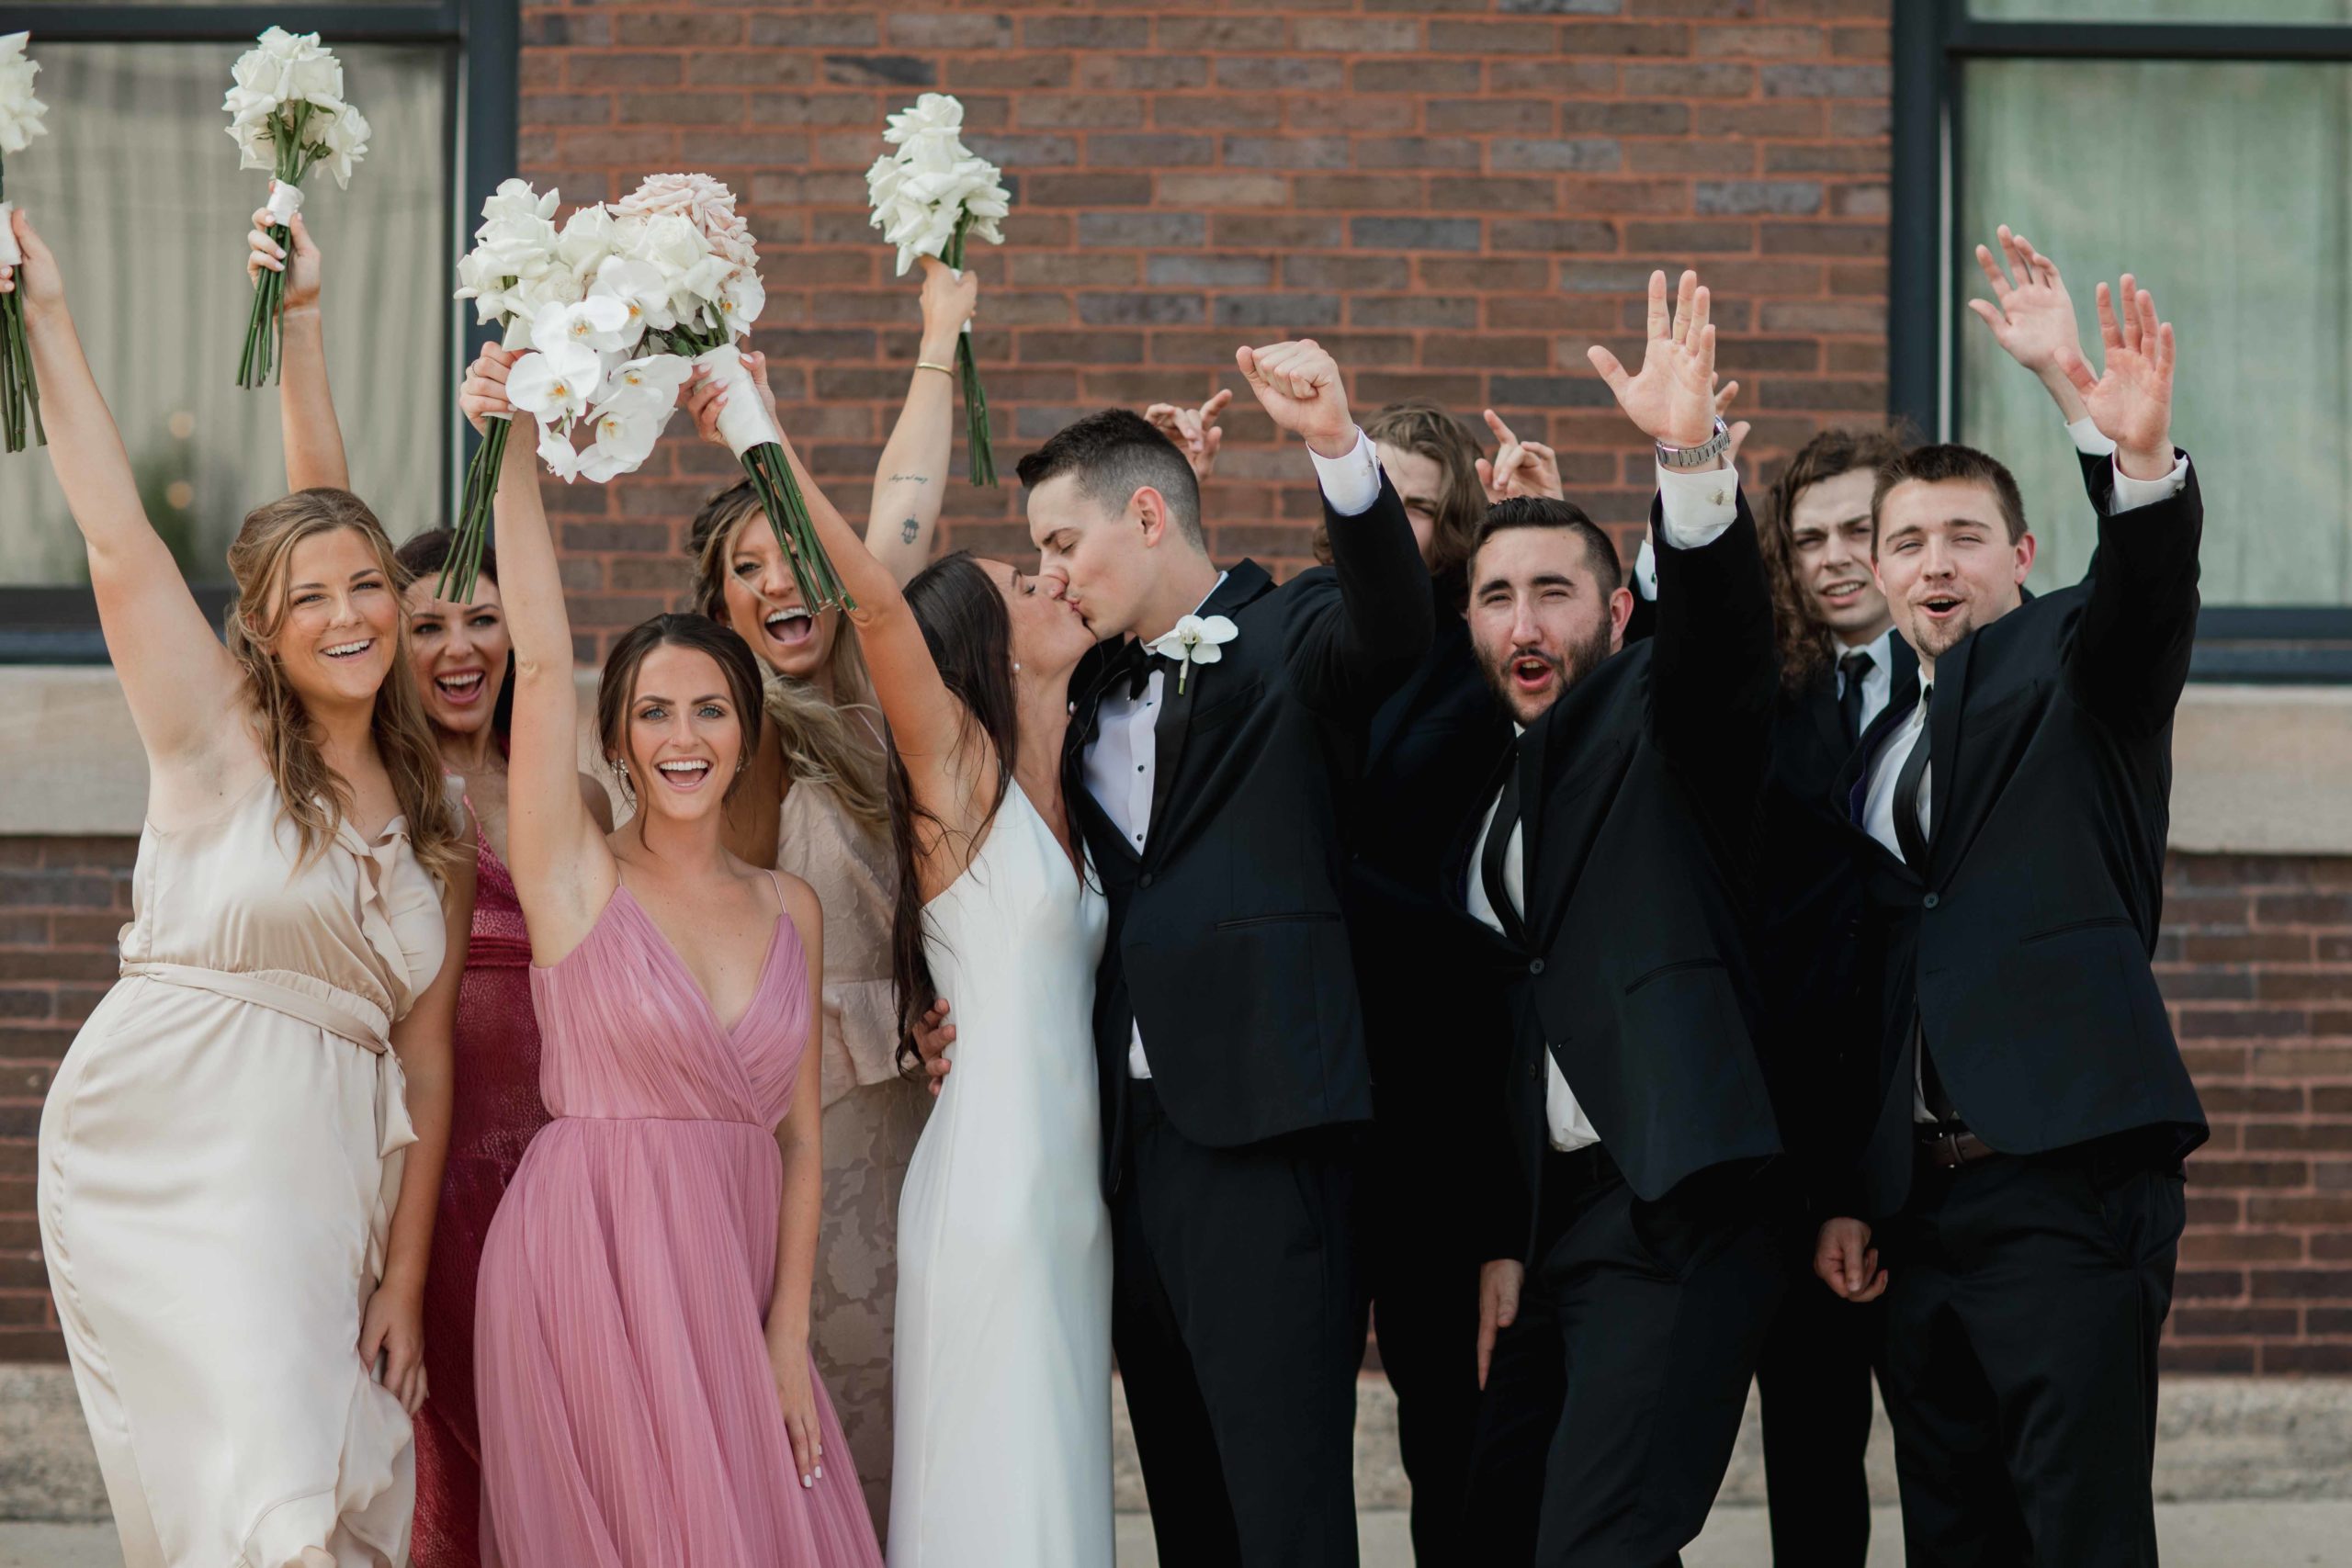 Company 251 Geneva Wedding Photographer bridal party cheering in front of building in Aurora Illinois